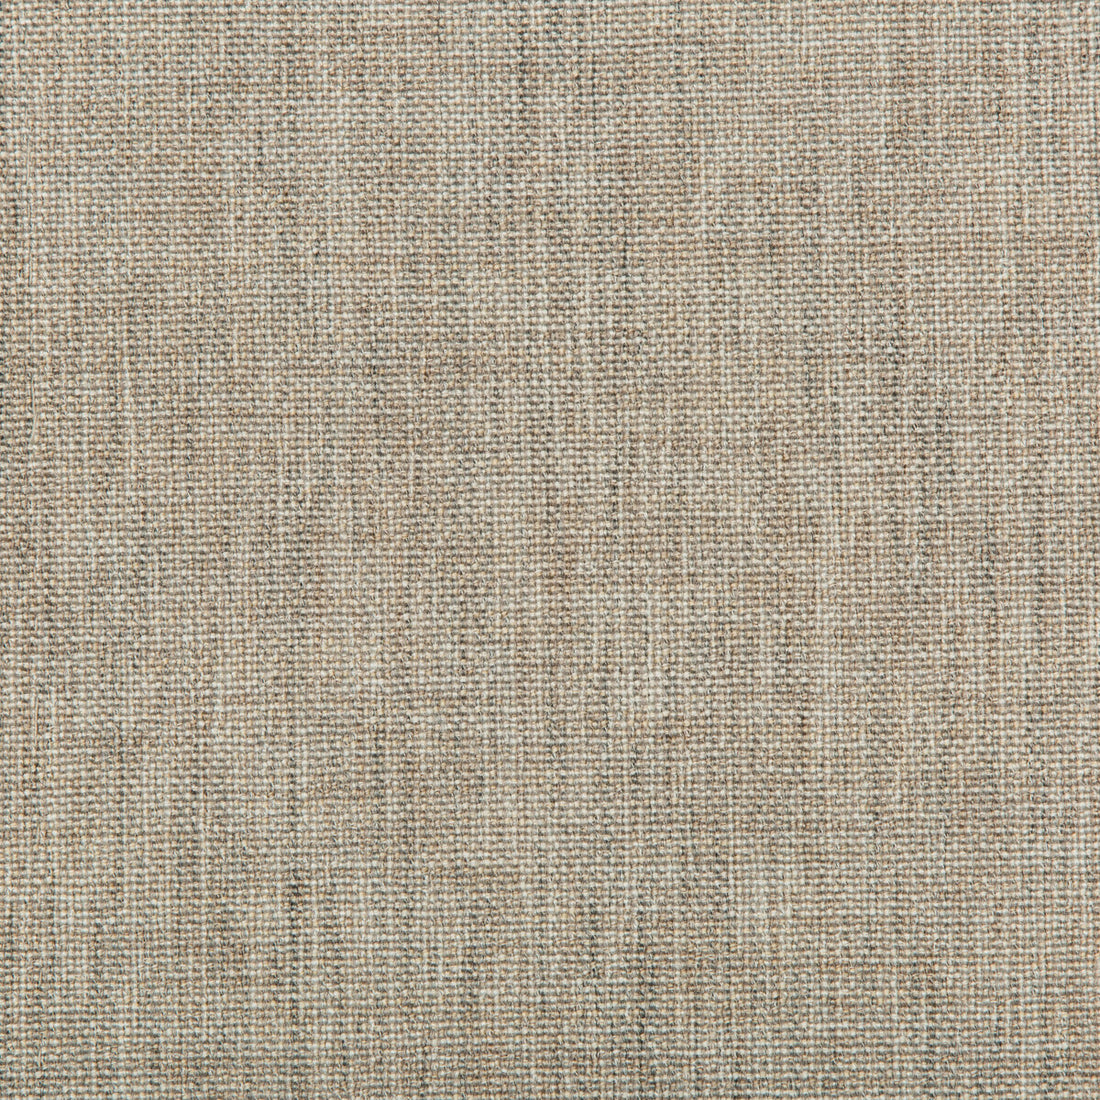 Kravet Couture fabric in 34796-11 color - pattern 34796.11.0 - by Kravet Couture in the Mabley Handler collection